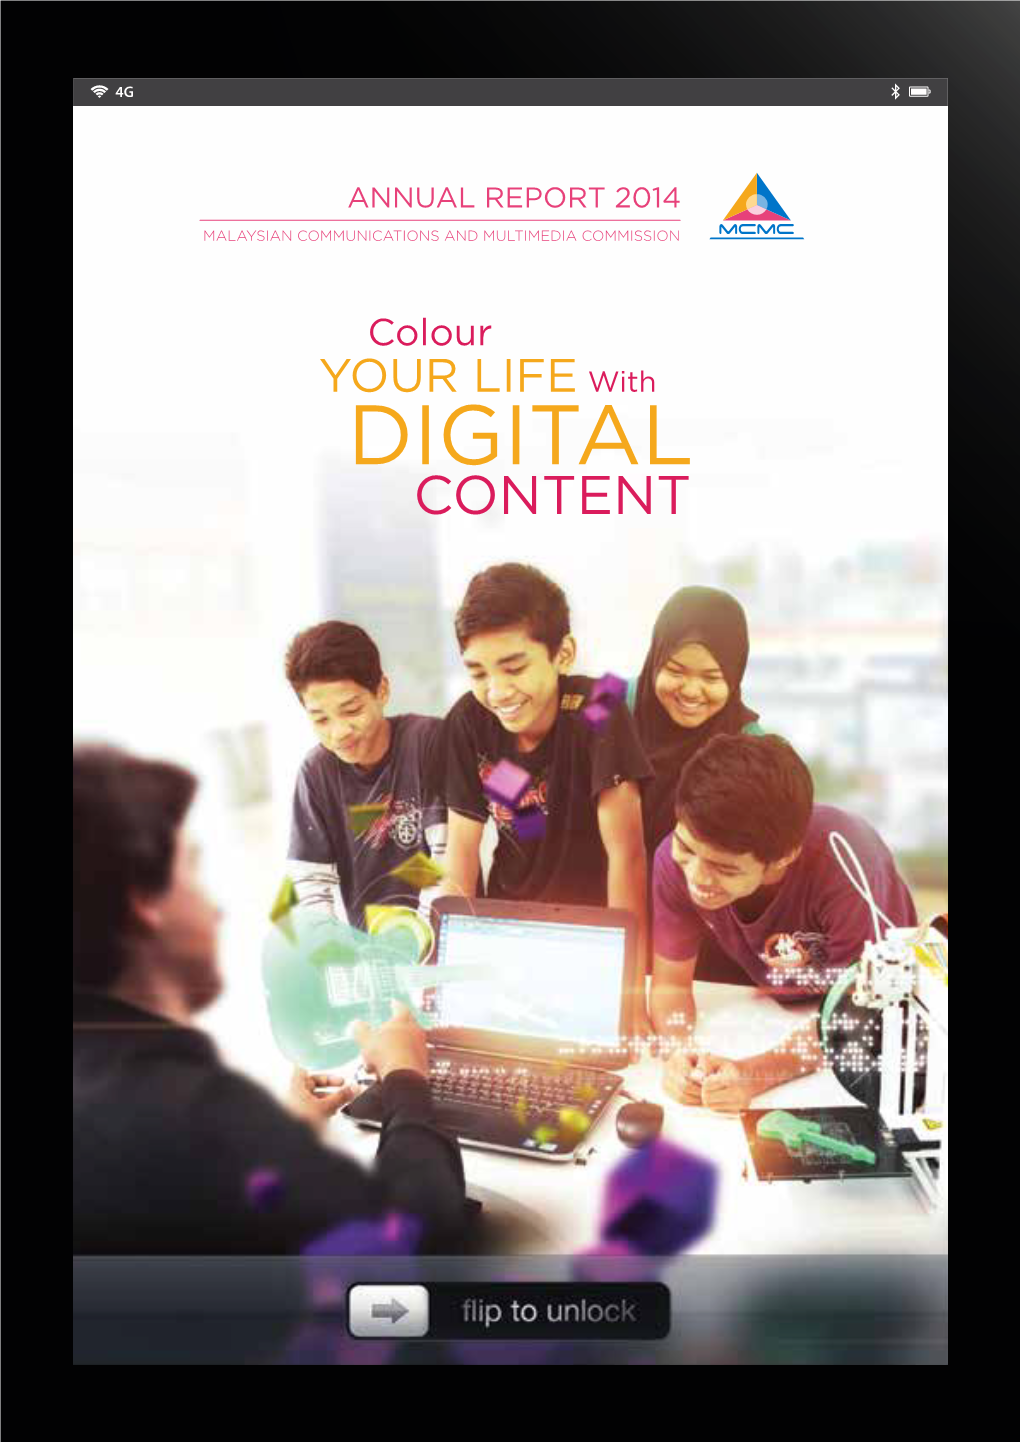 DIGITAL CONTENT 4G Malaysian Communications and Multimedia Commission Ipad